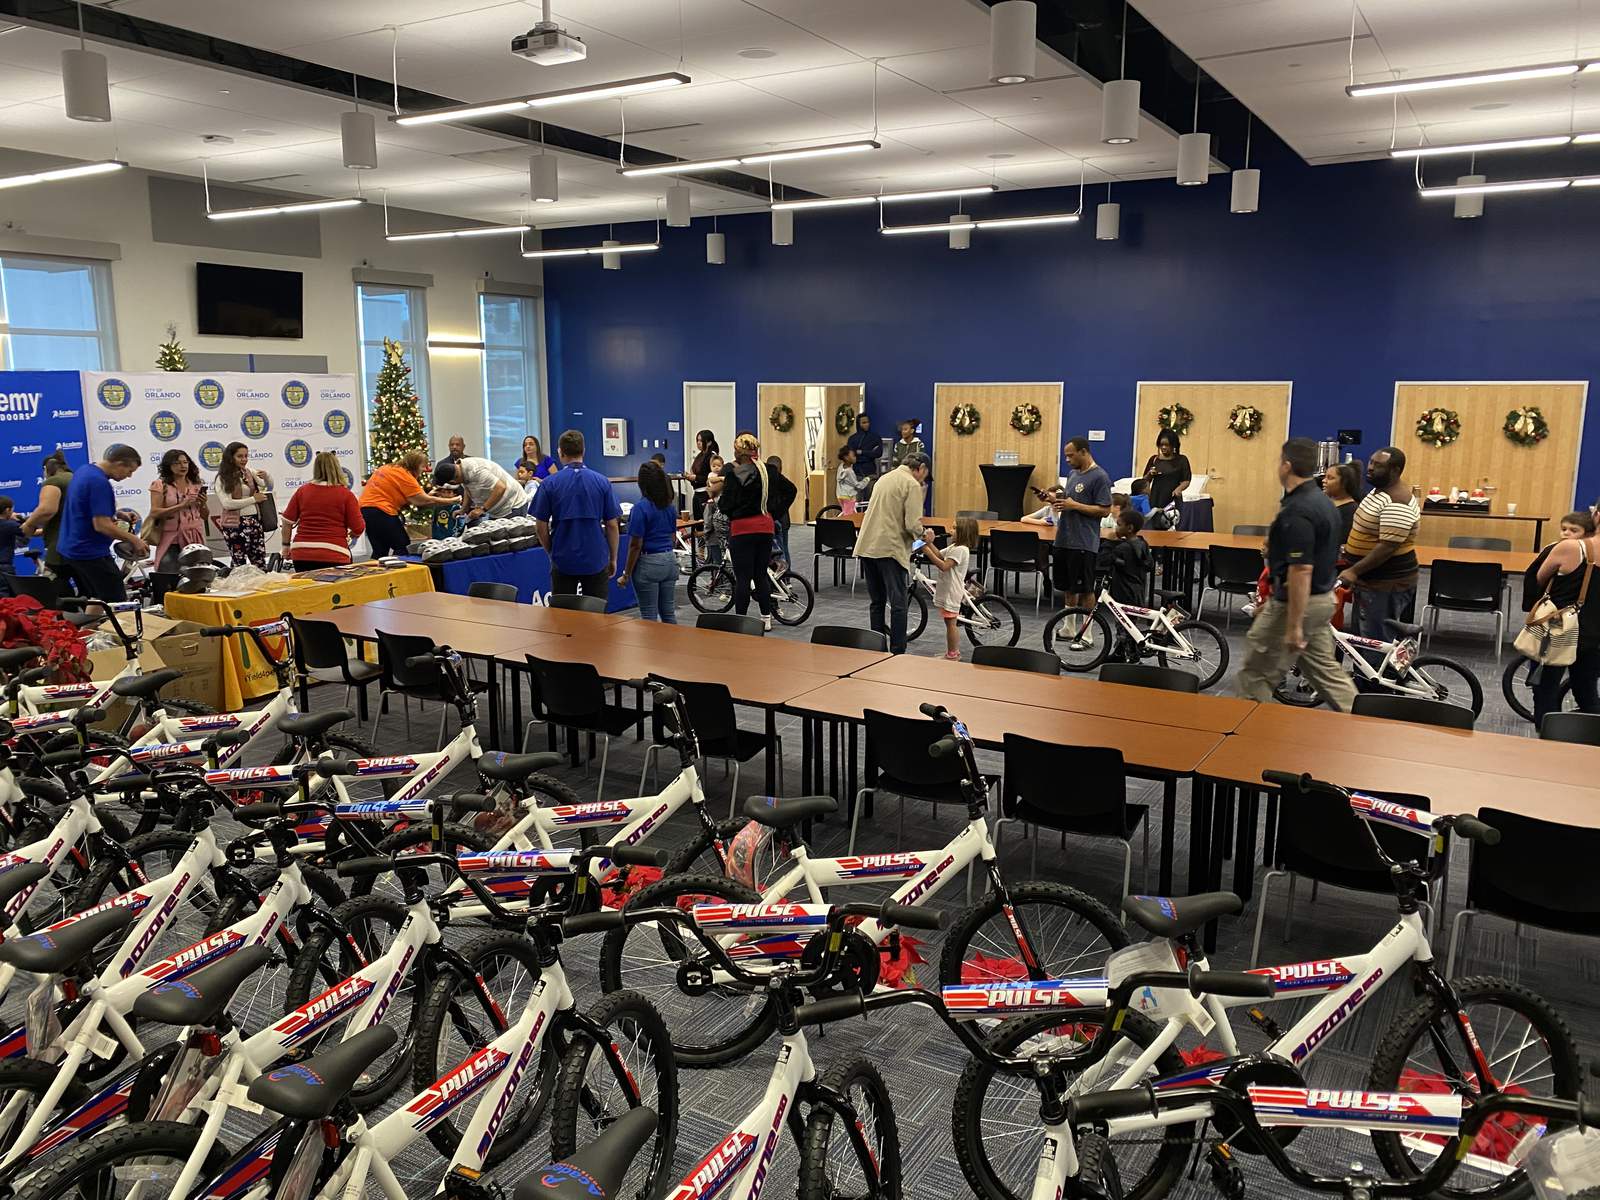 Christmas came early: Orlando police gift 100 students new bikes